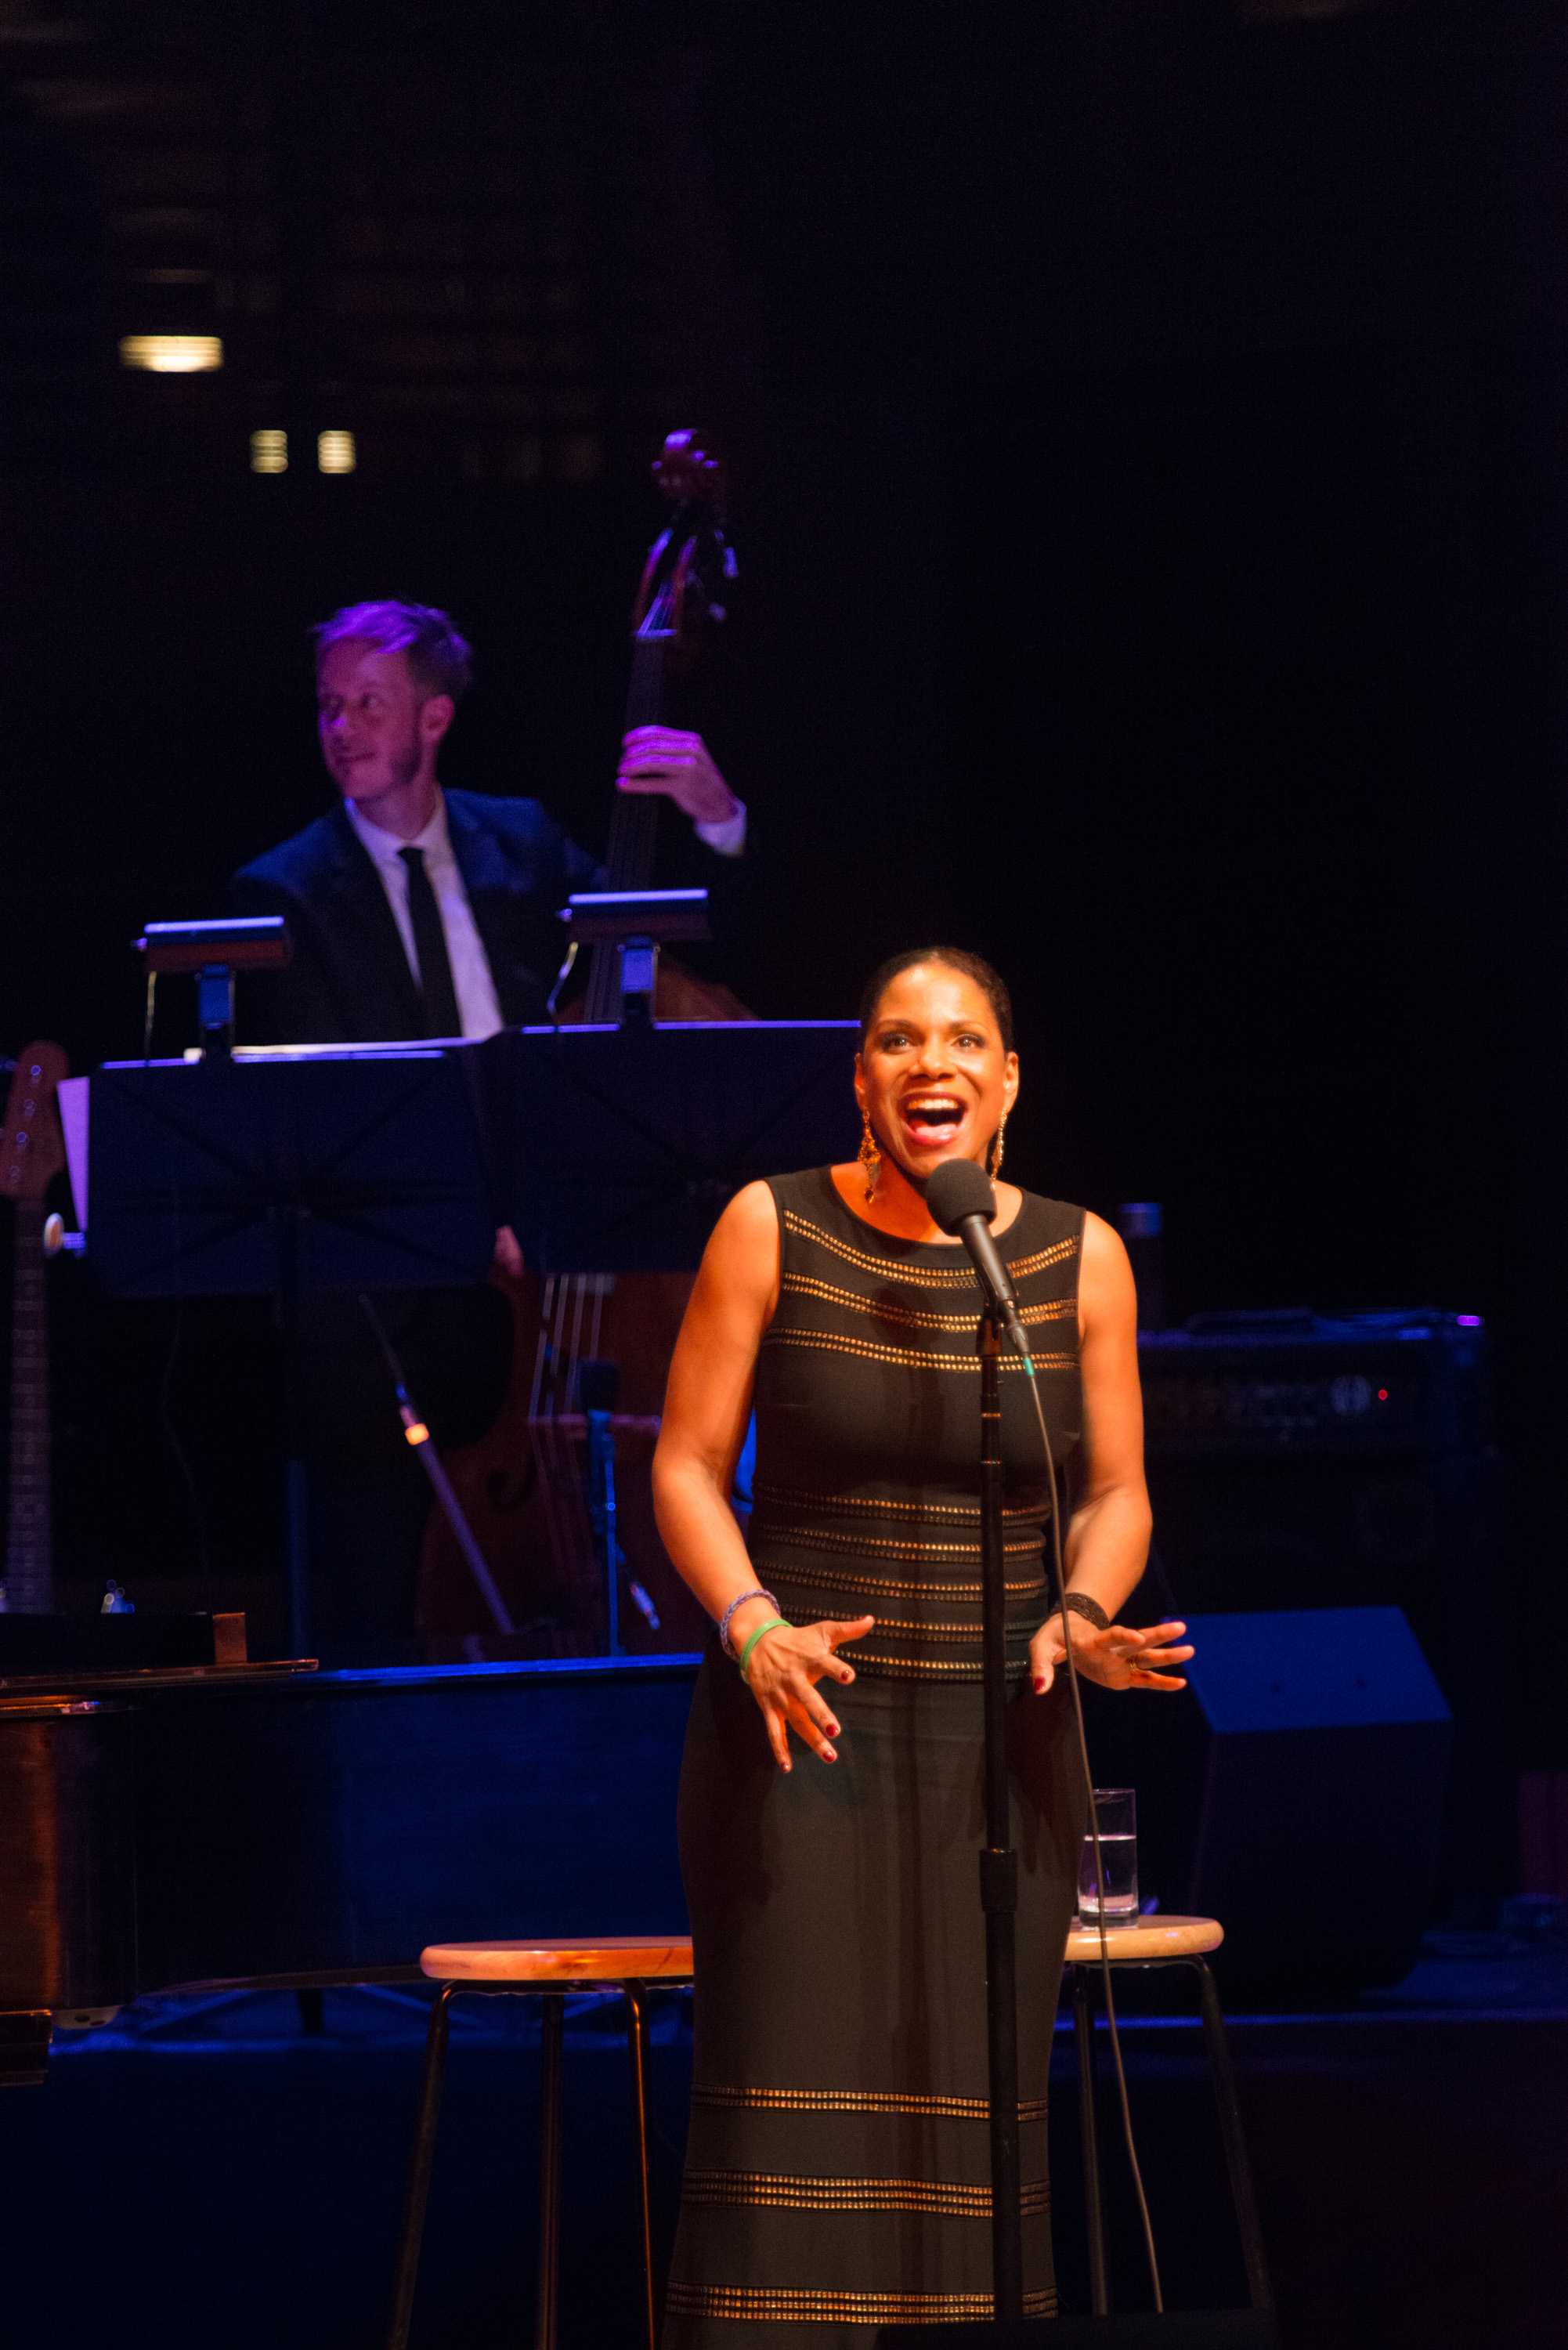 COURTESY // Kristen LokenTony and Grammy award winner Audra McDonald performed at the Green Music Center for nearly two hours last Saturday.